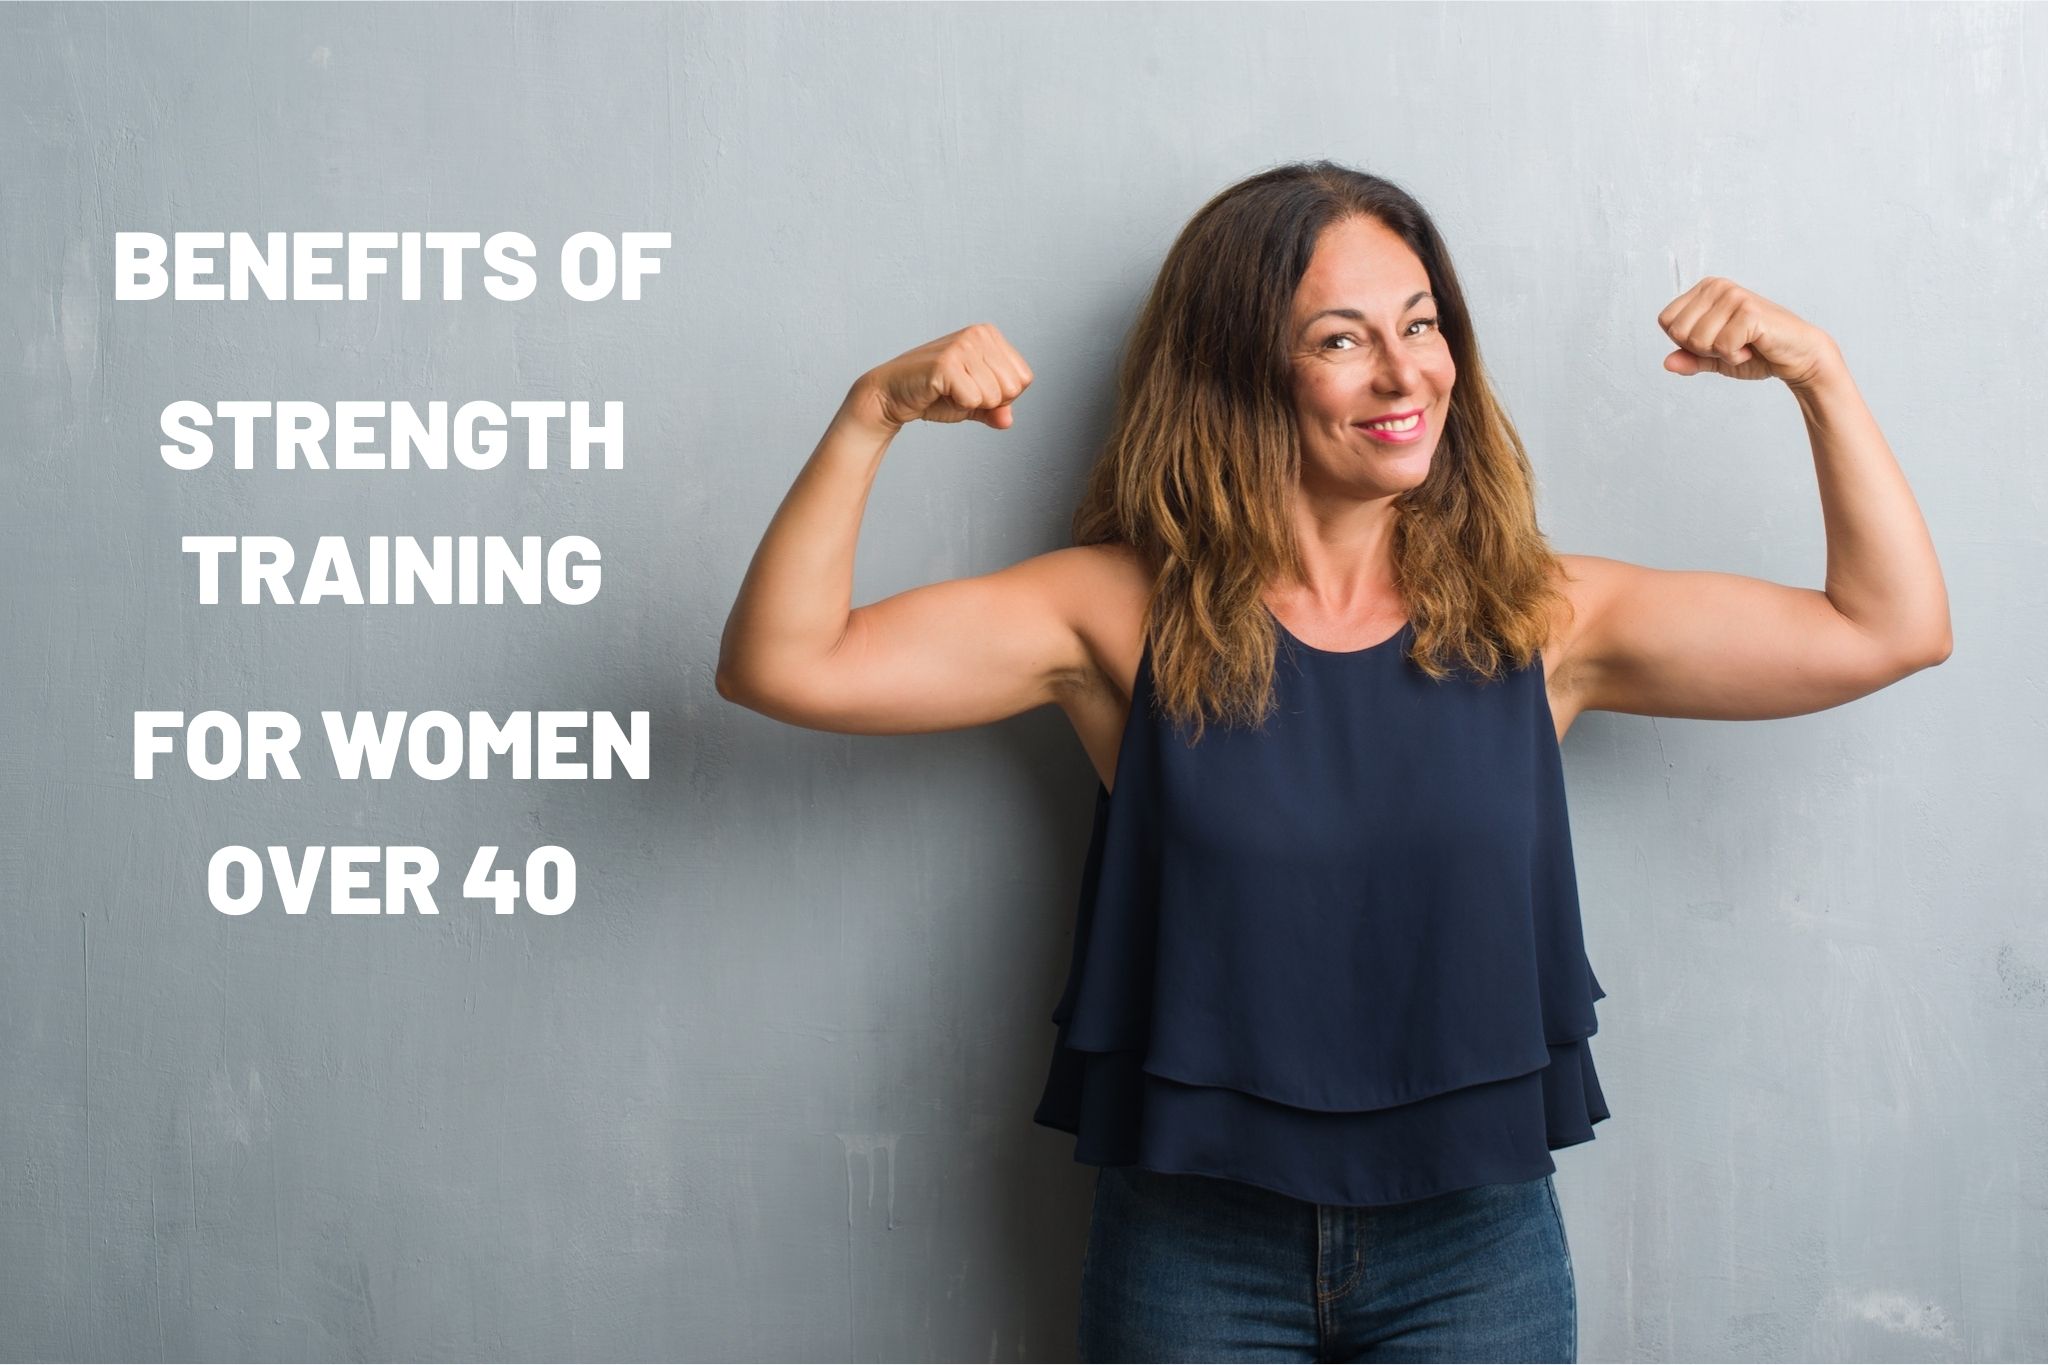 Exercise Clothes, Fashion Over 40